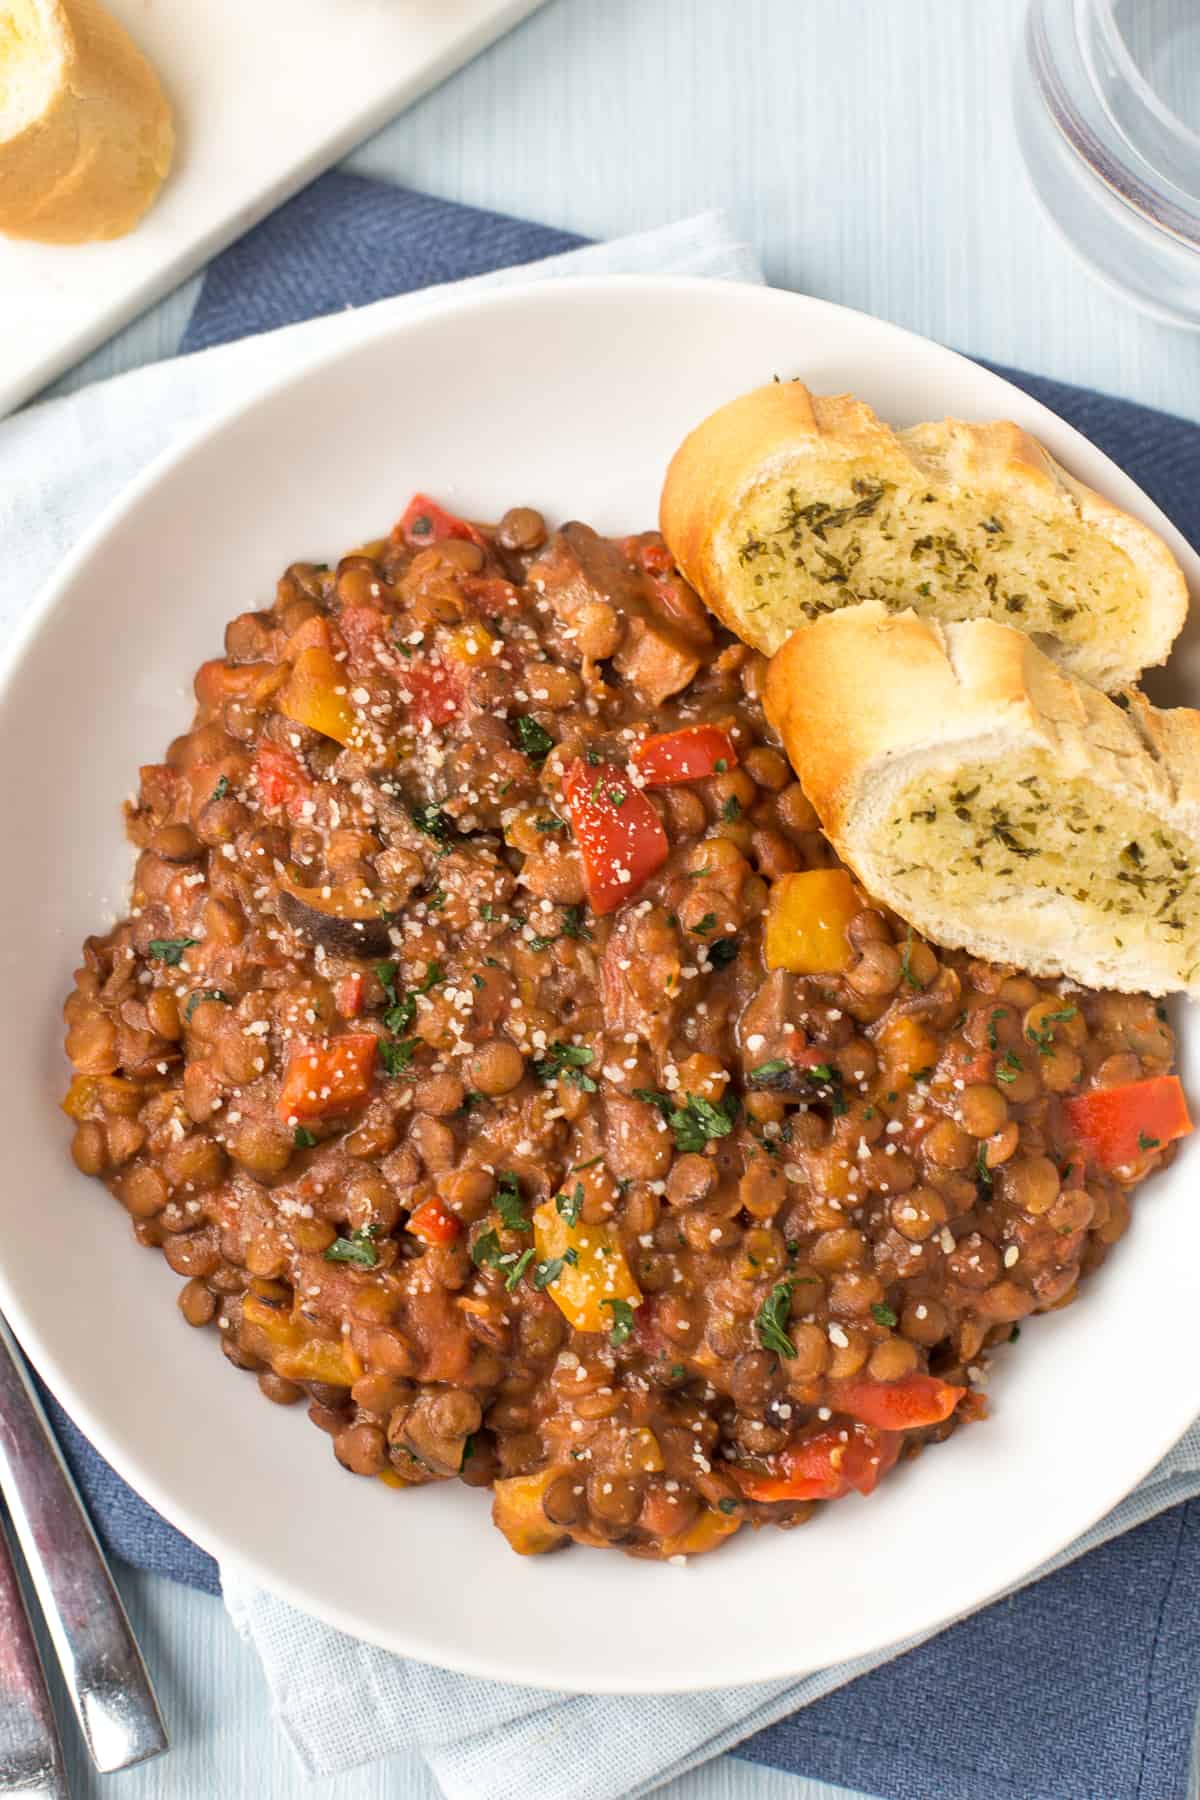 A portion of cheesy lentils with garlic bread.